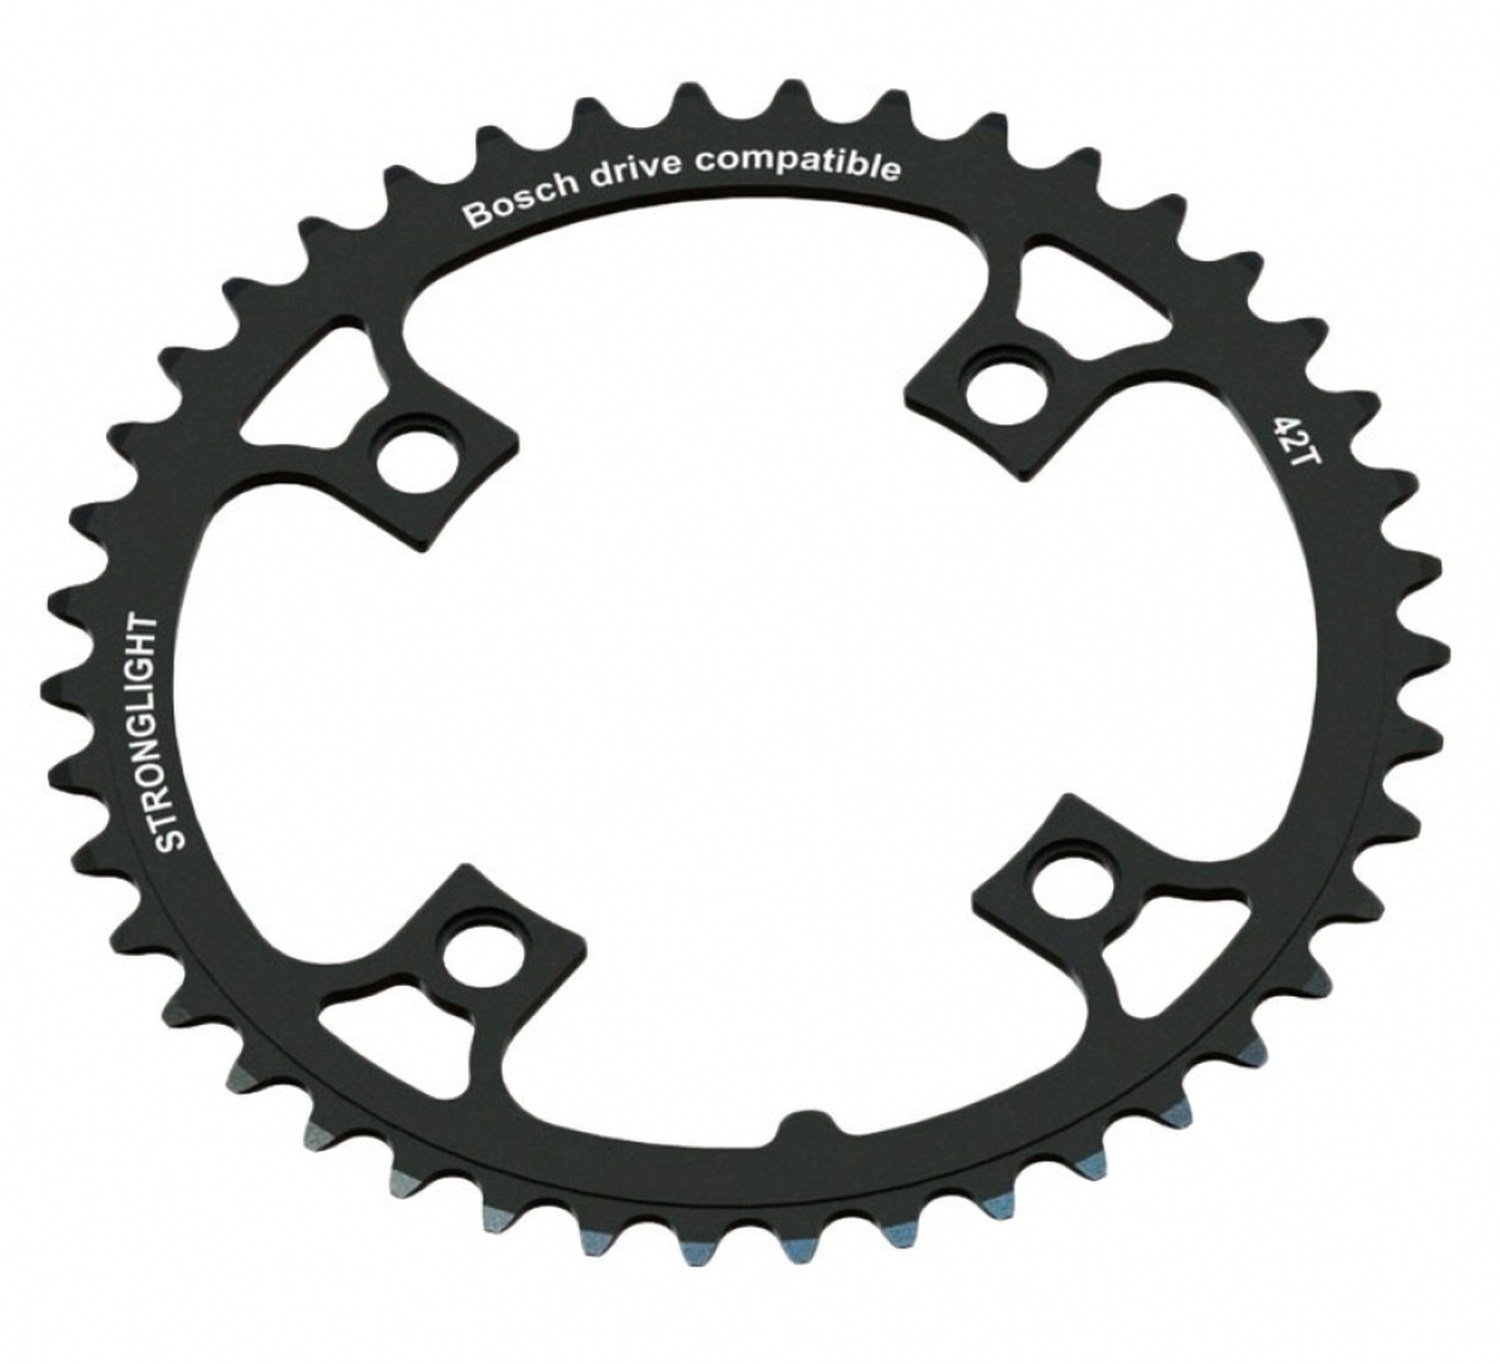 SEB138 Stronglight 38T Bosch 1st Generation Compatible Chainring